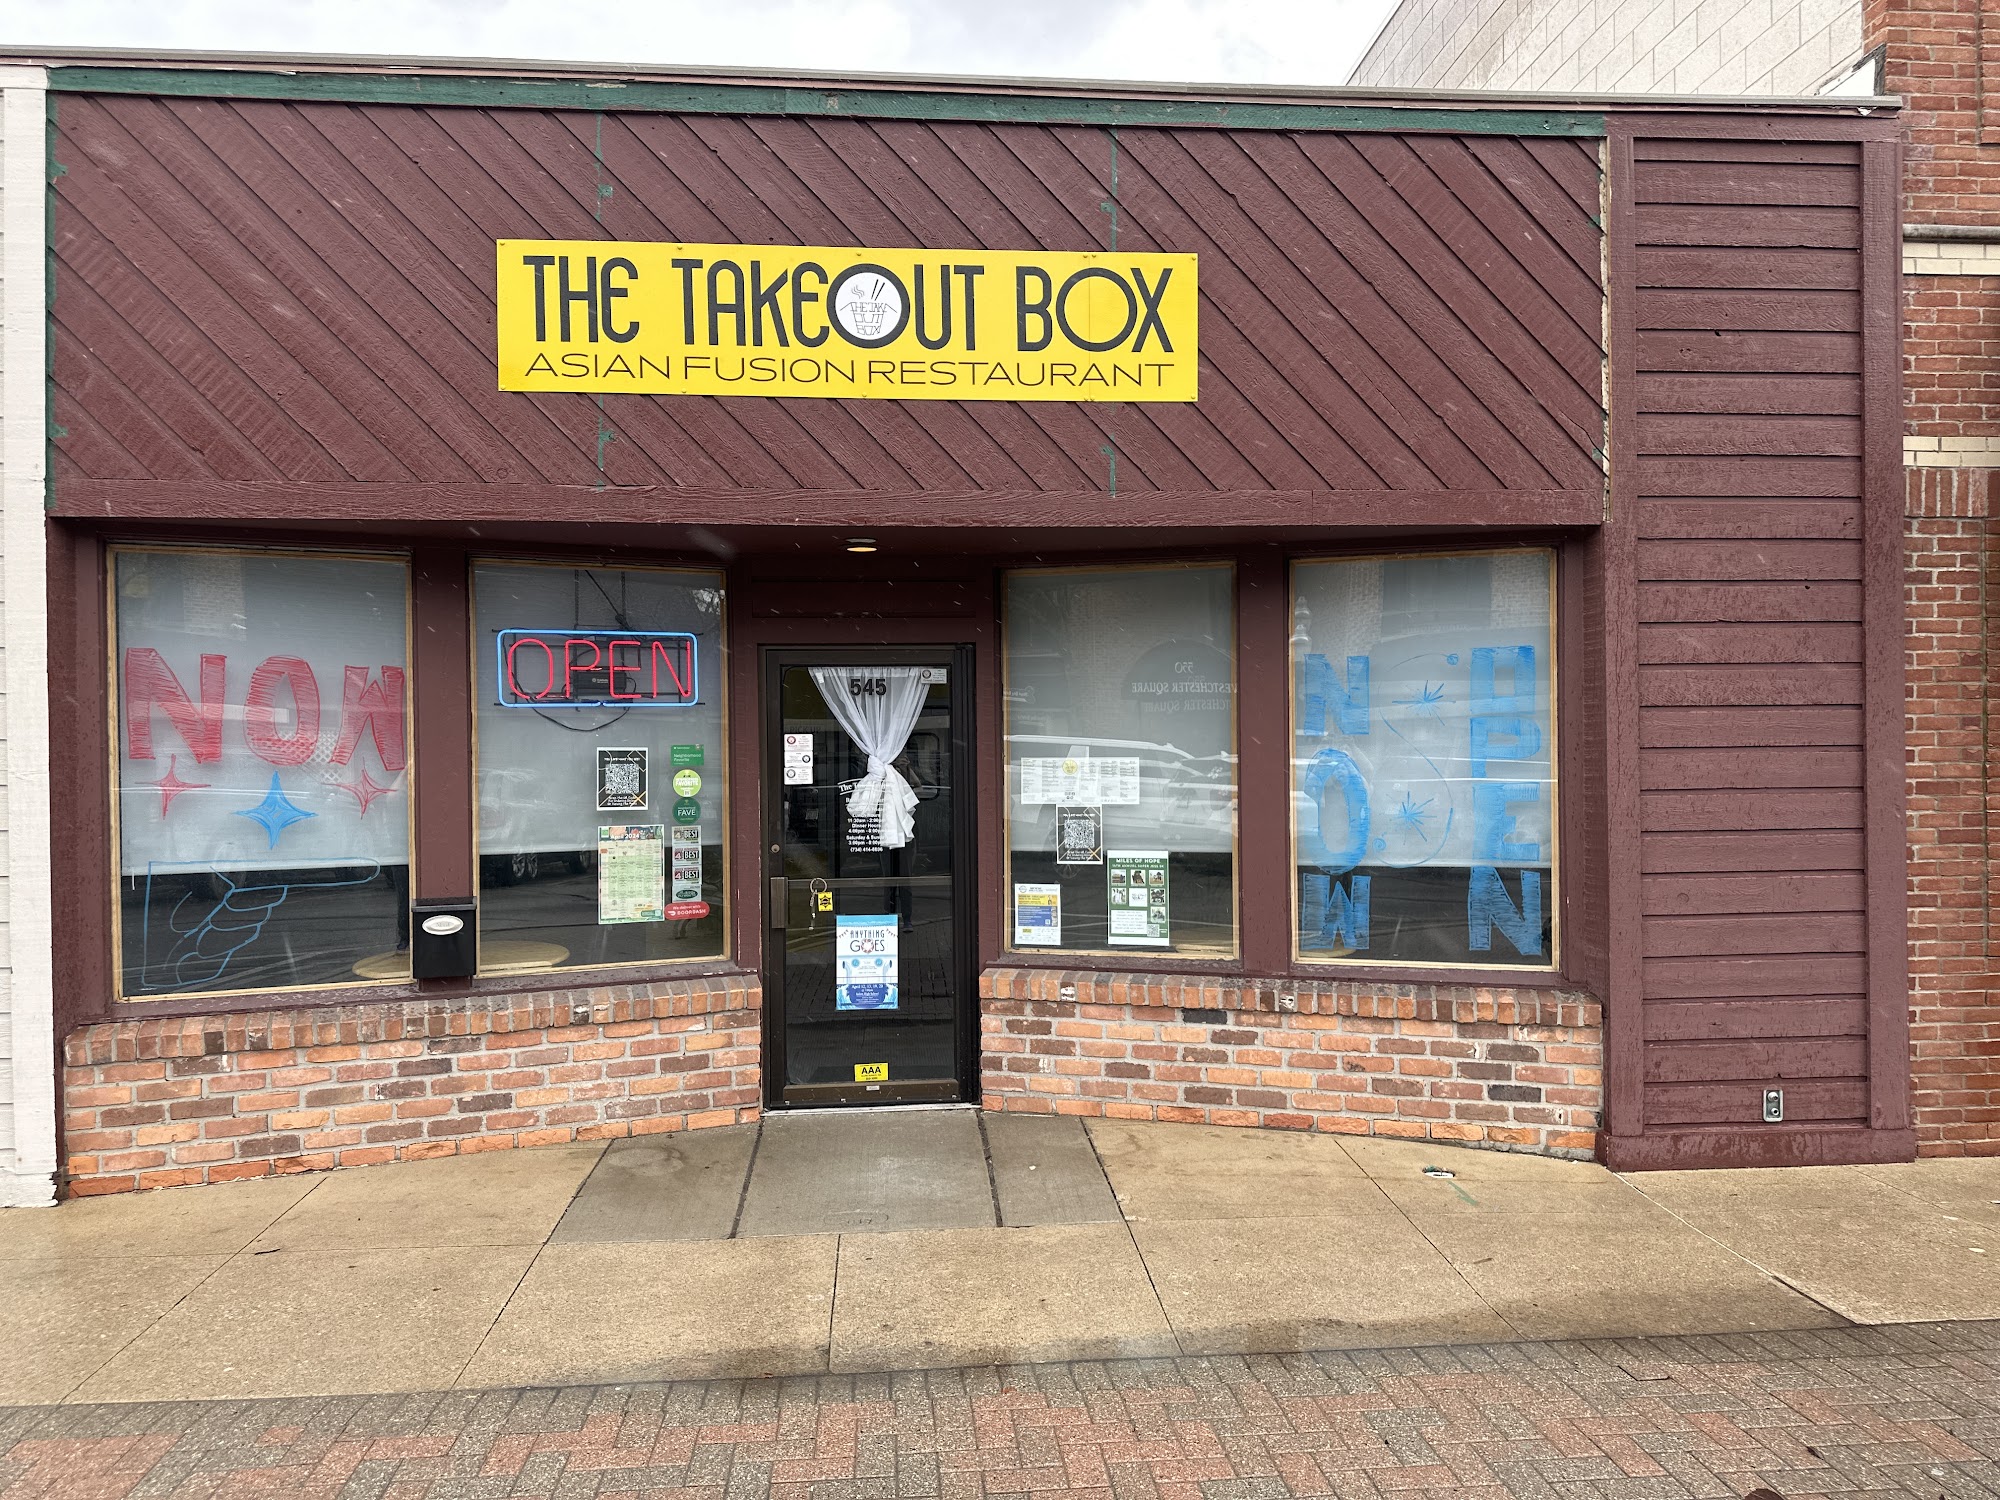 The Takeout Box Plymouth